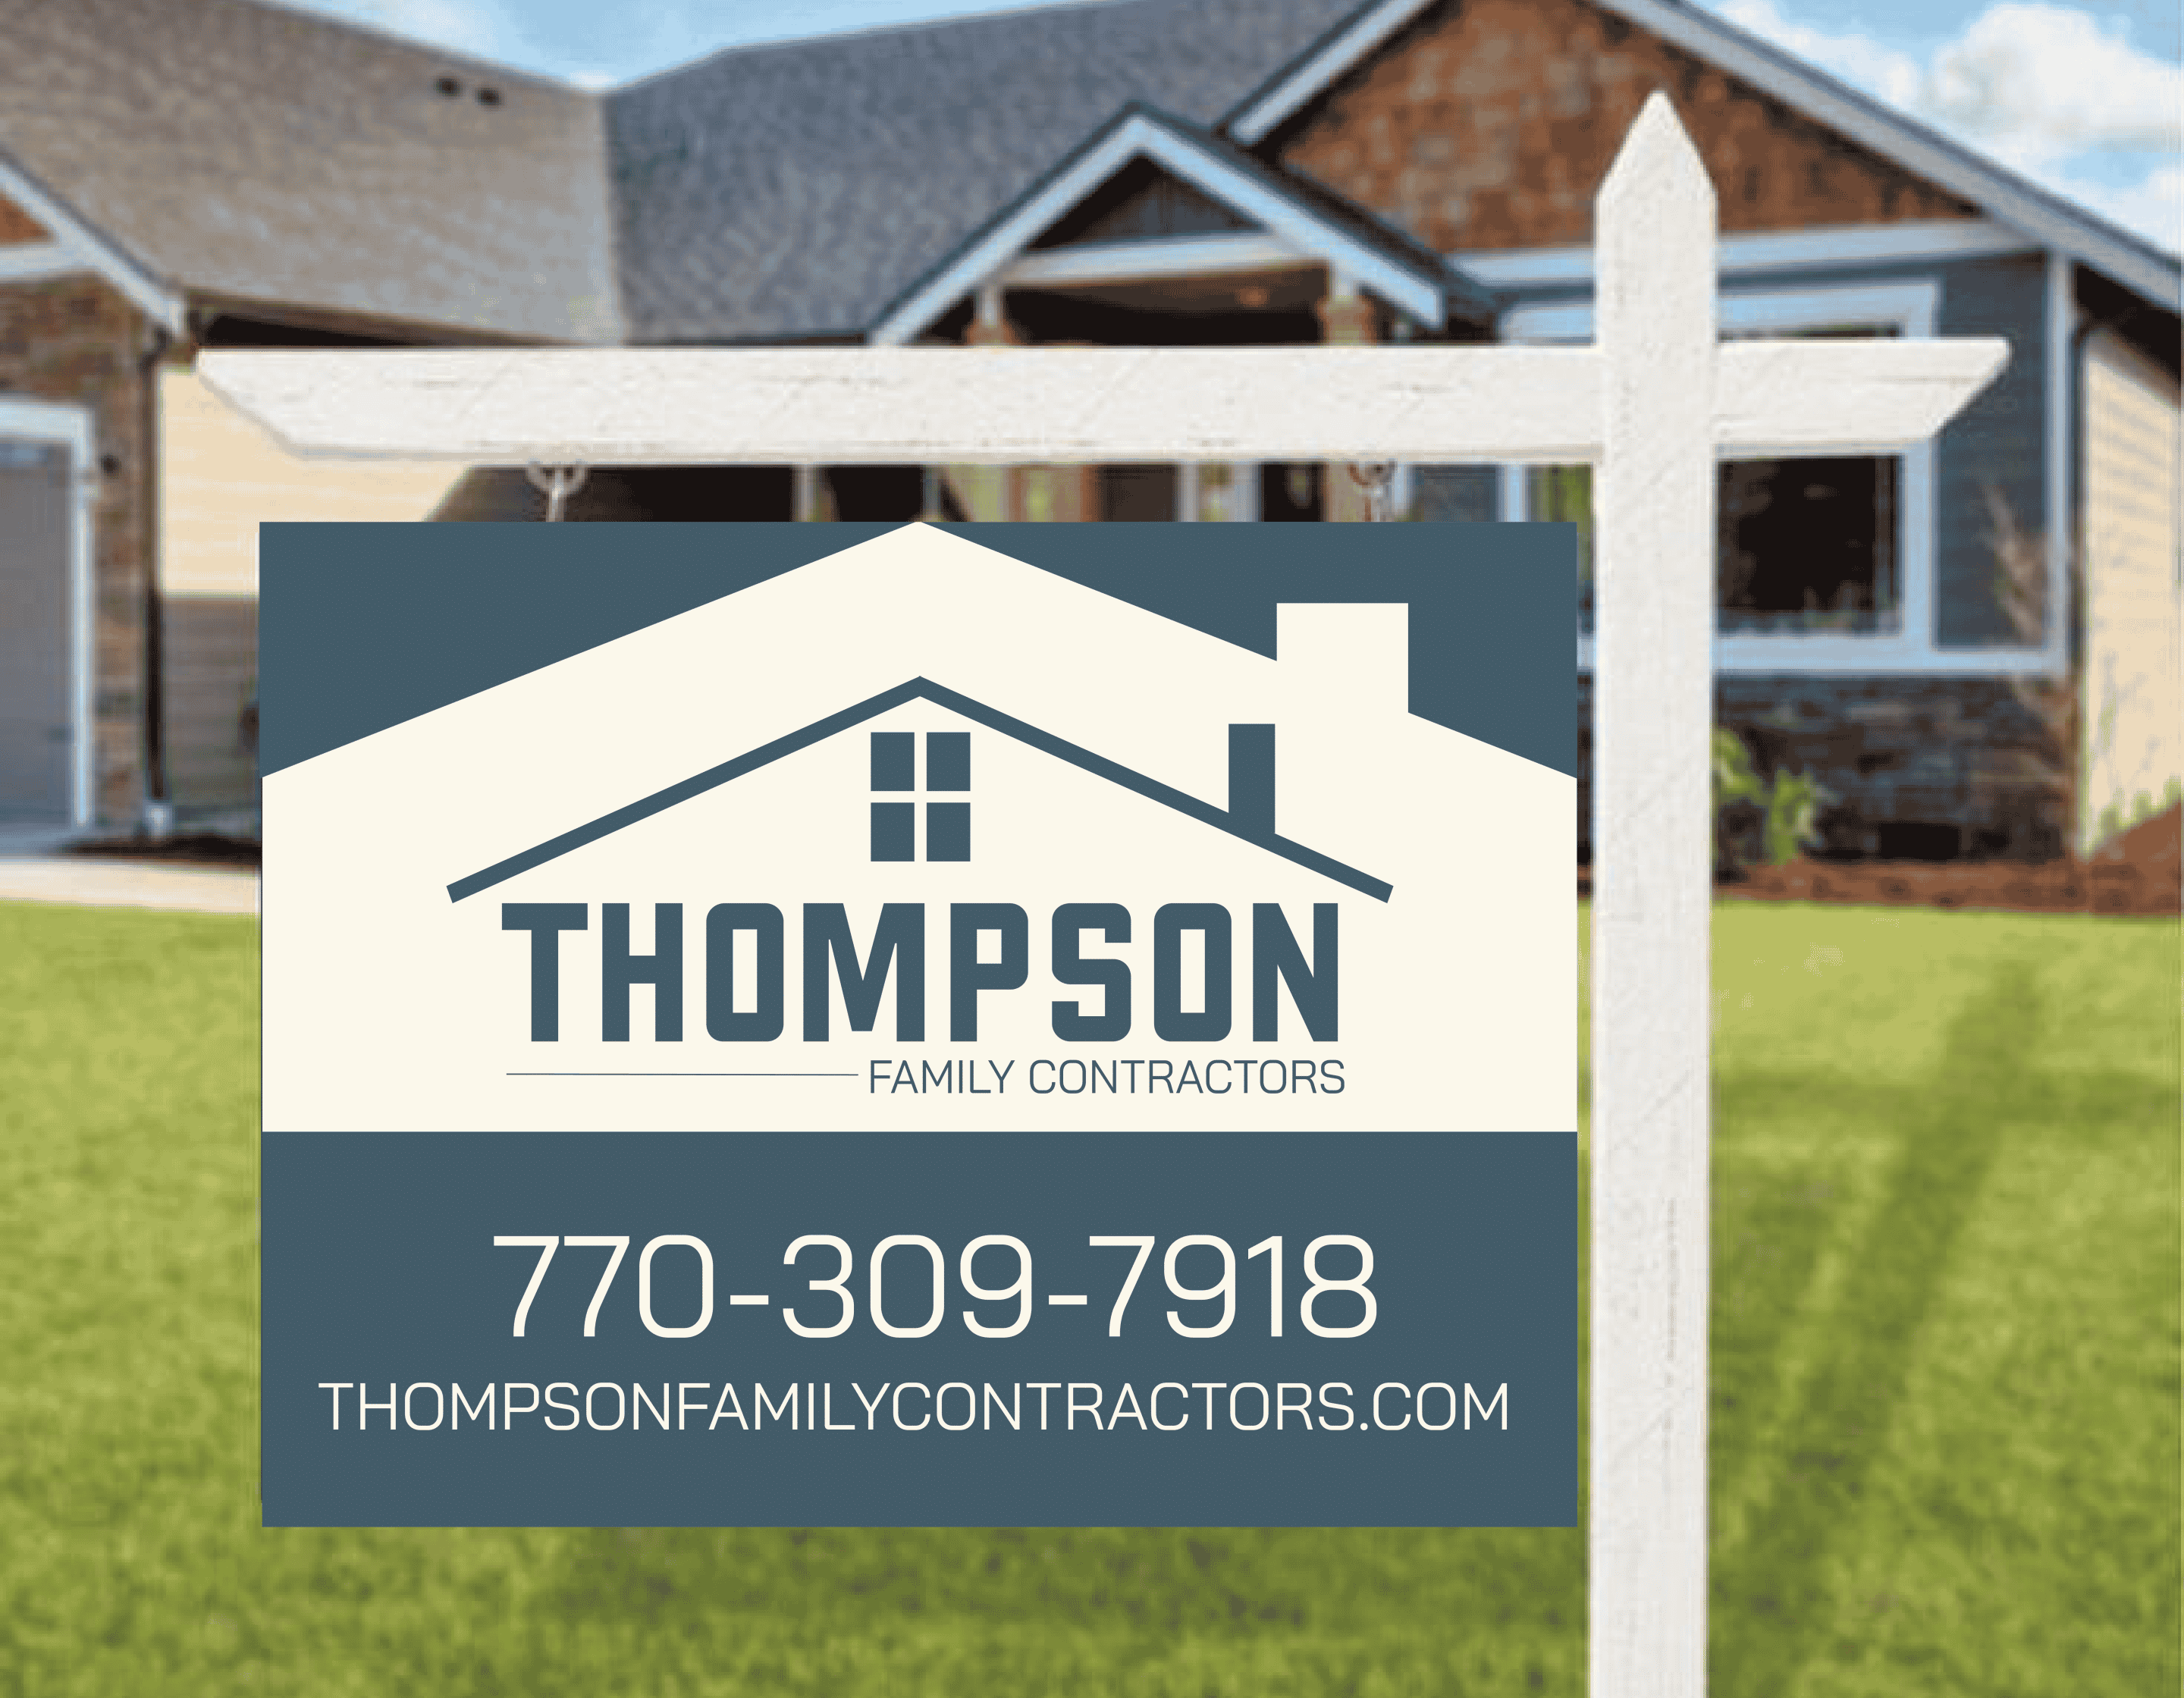 Thompson Family Contractors yard sign mockup